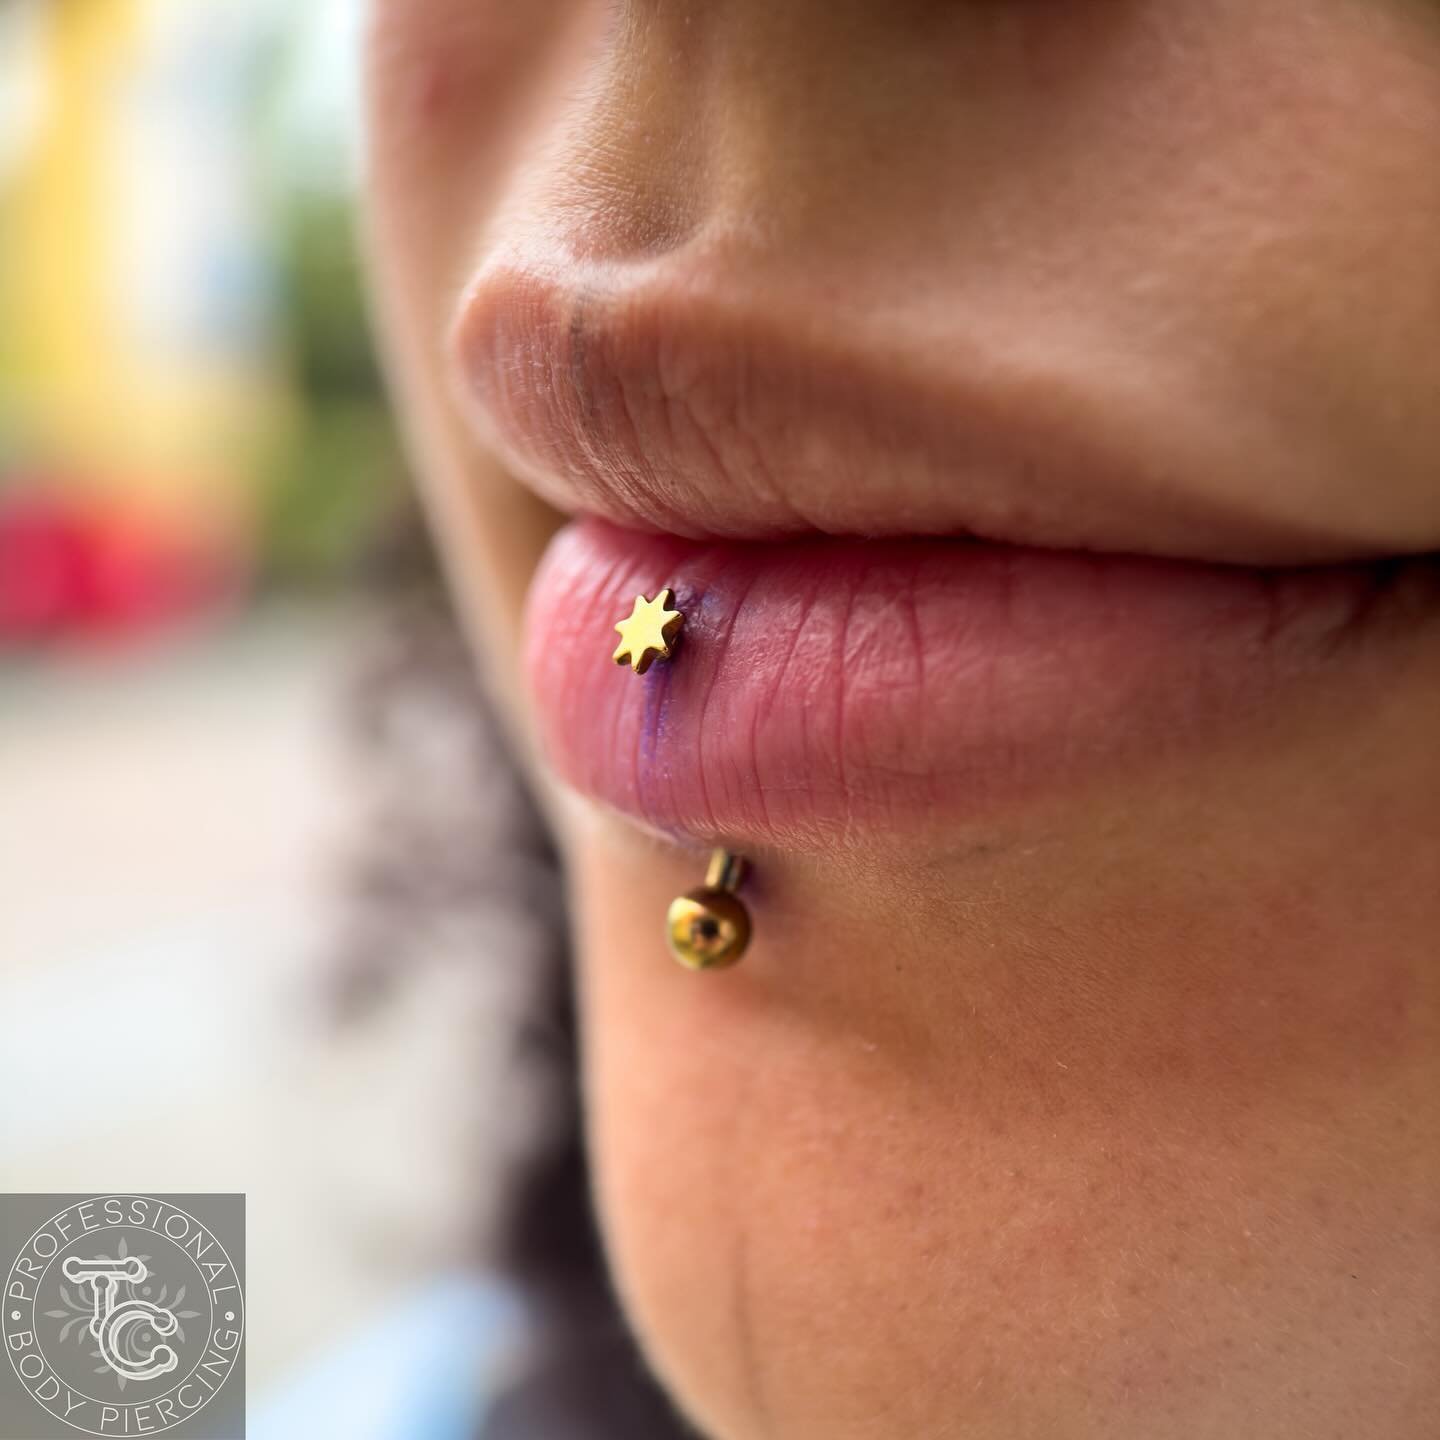 ☀️ 14g freehand vertical labret from today ☀️

✨Implant grade titanium components anodized to a rose gold / light pink.

#verticallabret #verticallabretpiercing #freehandpiercing #anodizing #anodizingisawesome #eggharbortownship #theinkuisition